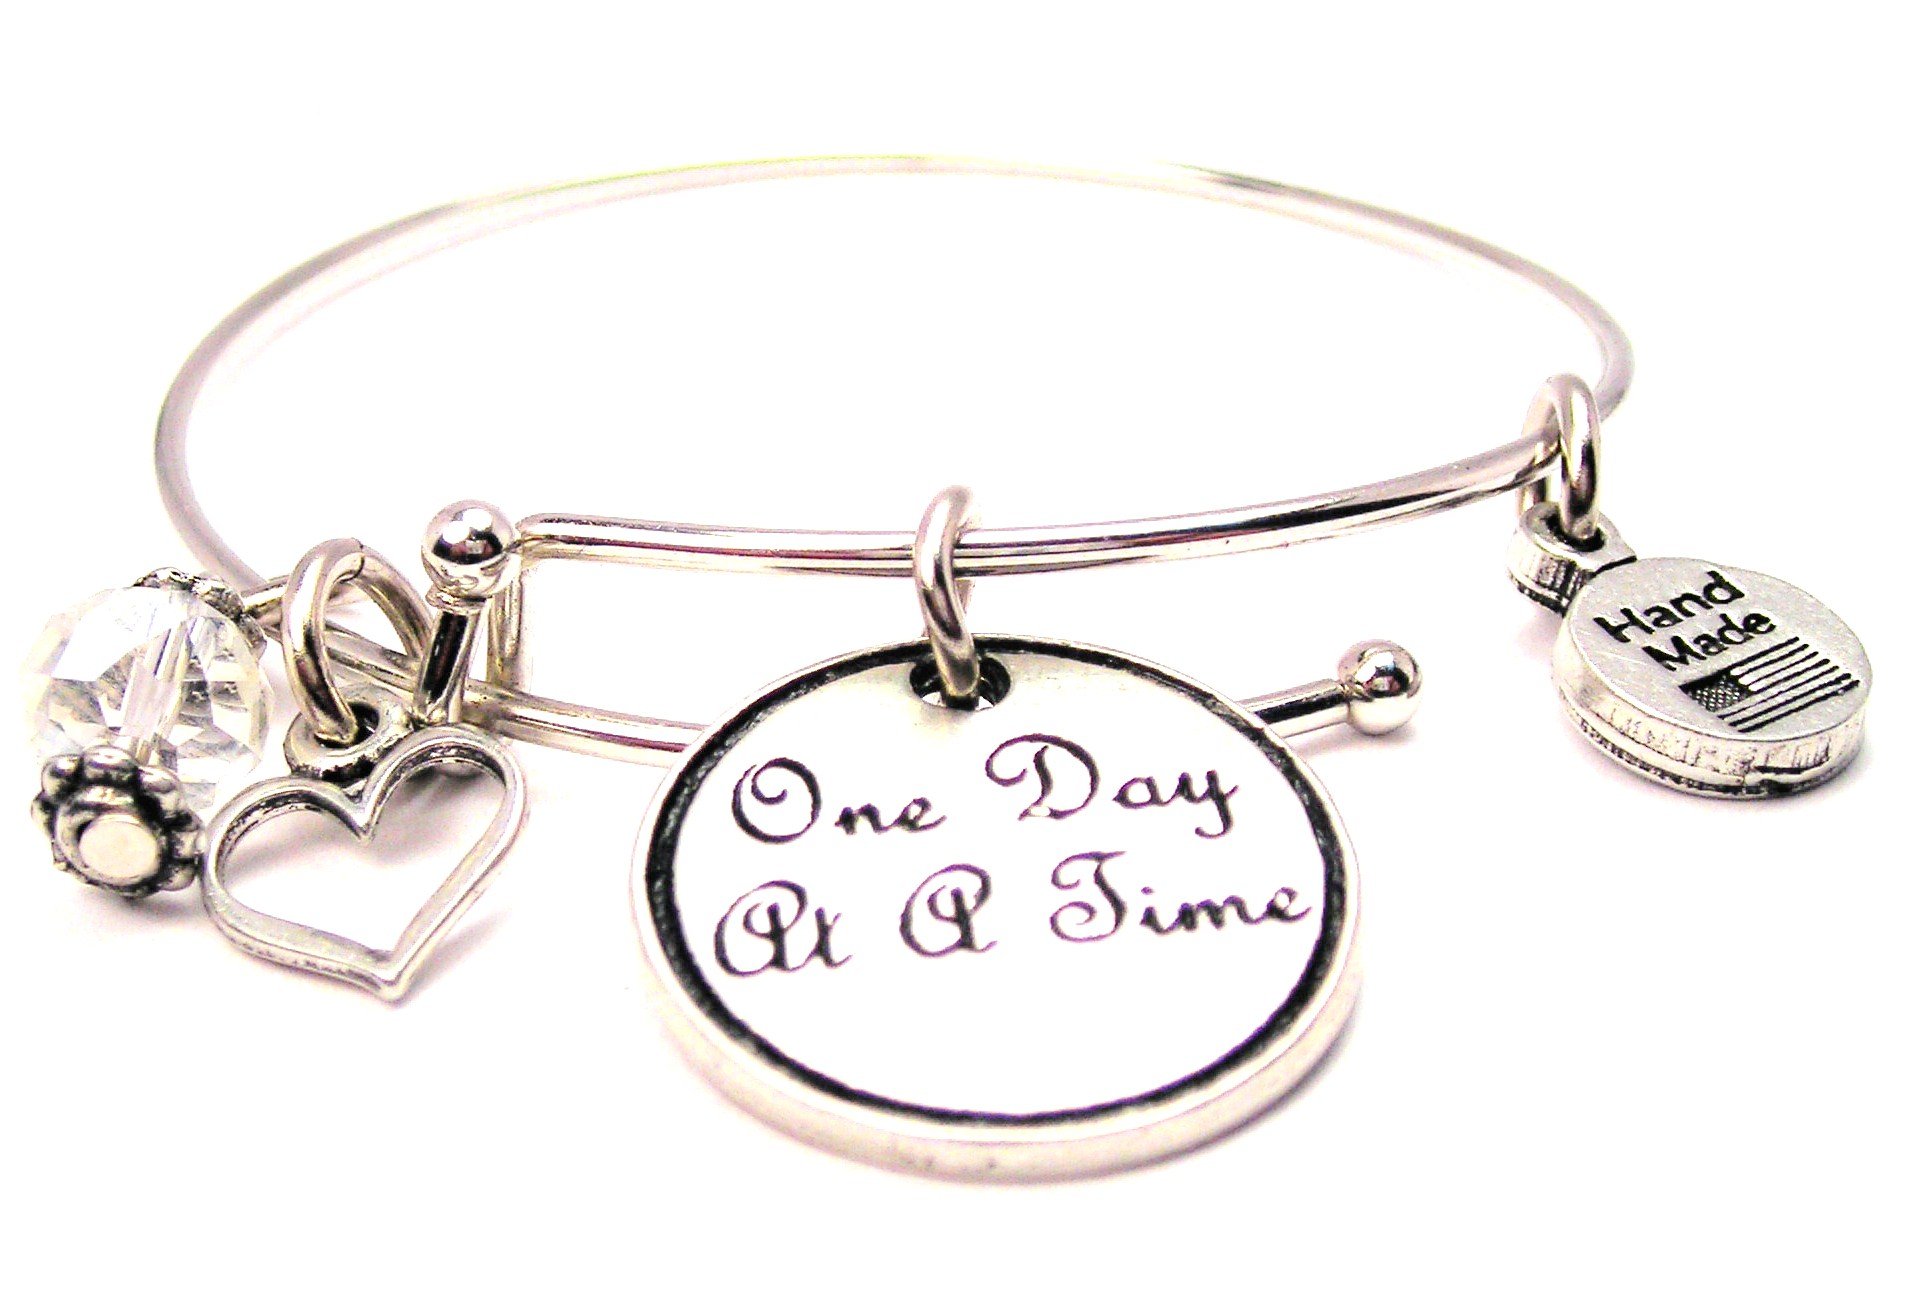 One day at a time bracelet